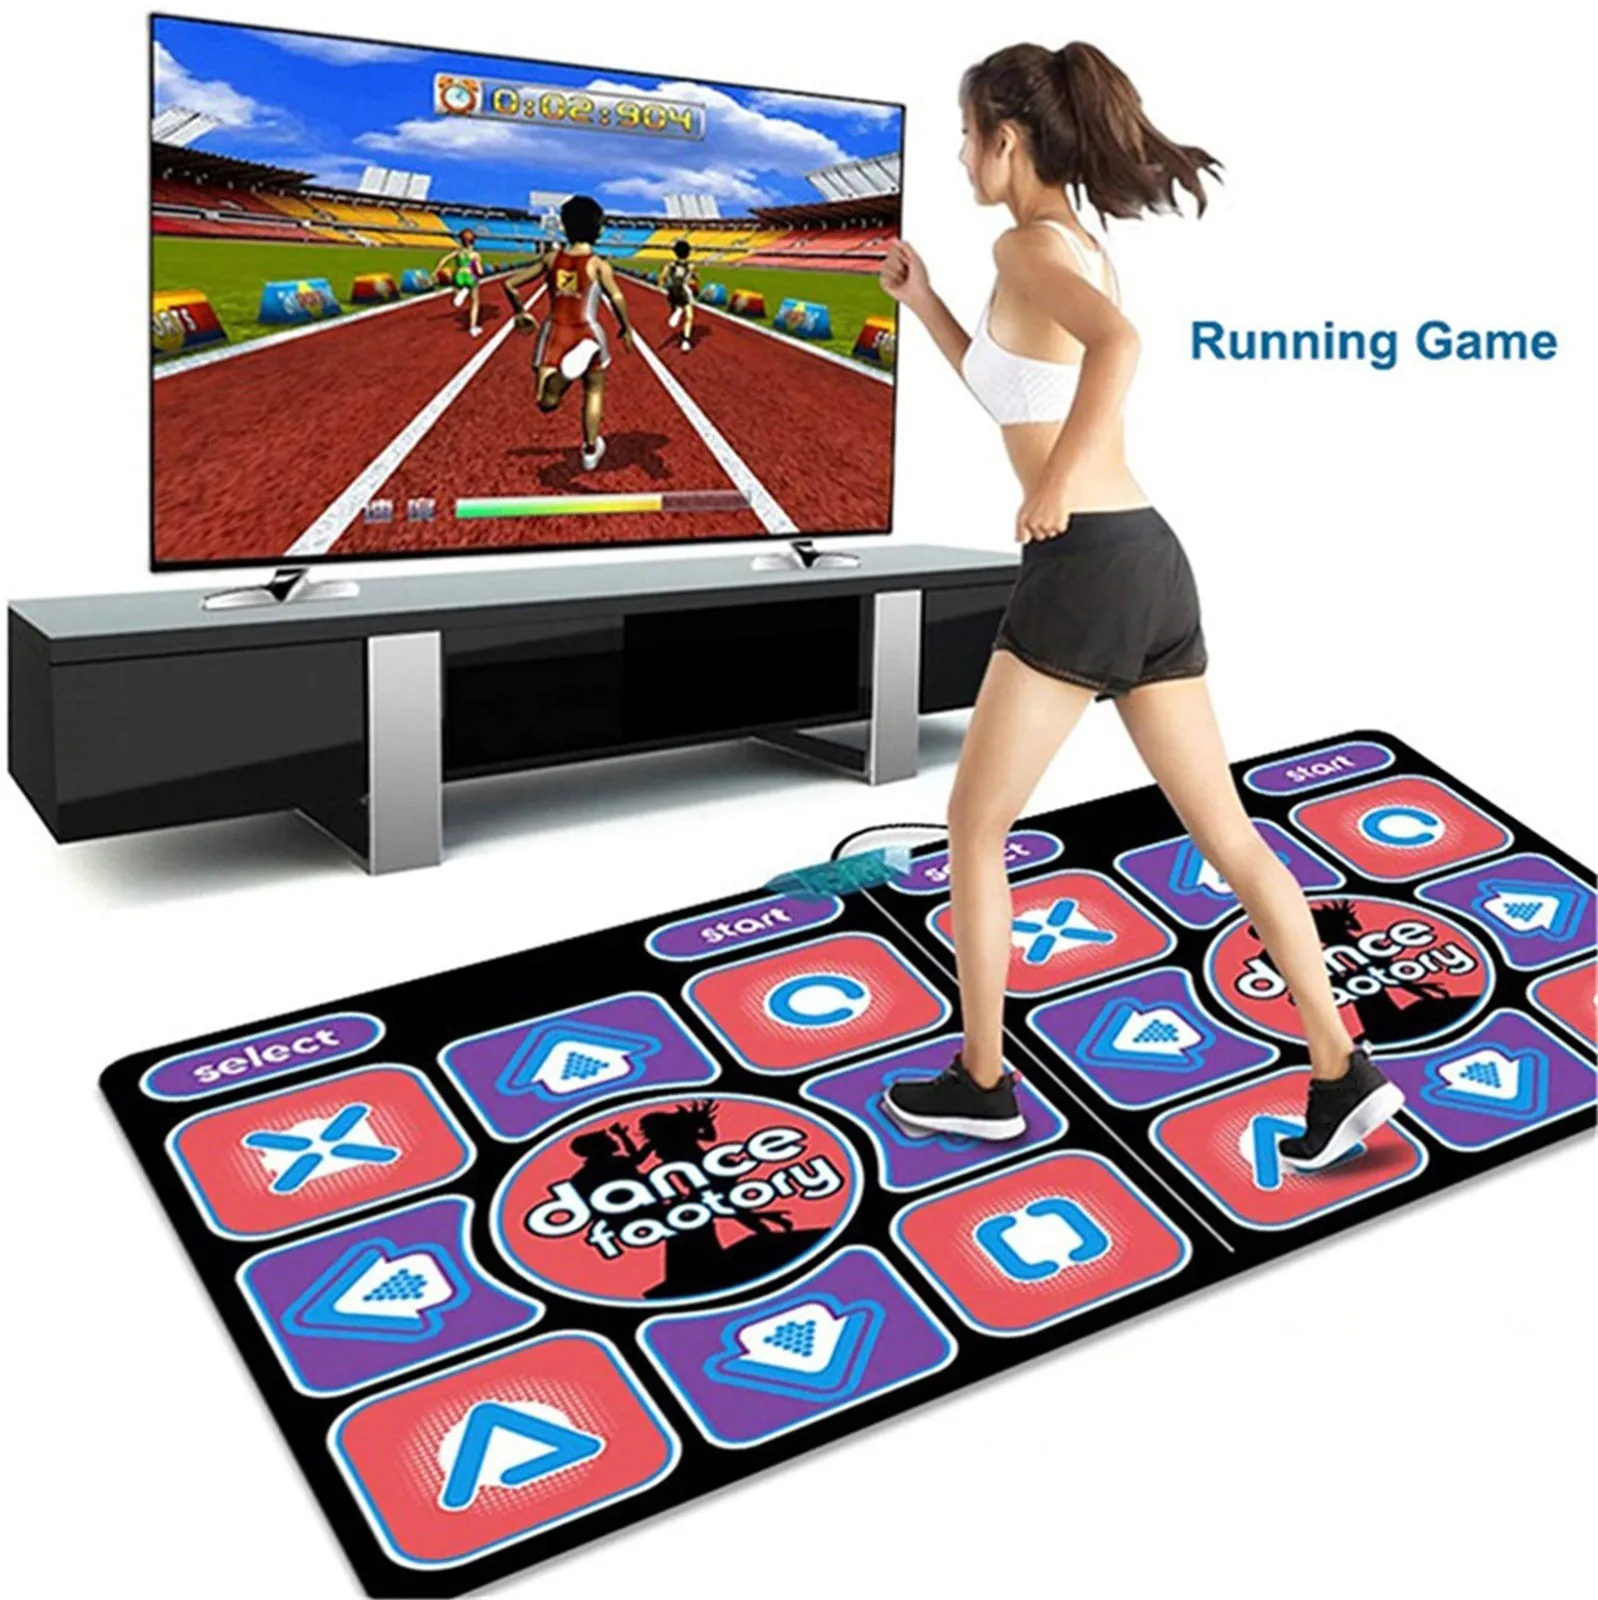 Dancing Step PC TV Household Game Dance Pad Anti-Slip Wear Resistant Wireless Double Dancing 2 Remote Controller Yoga Fitness Body Building MapleMiss Double Game Dance Mat Purple 